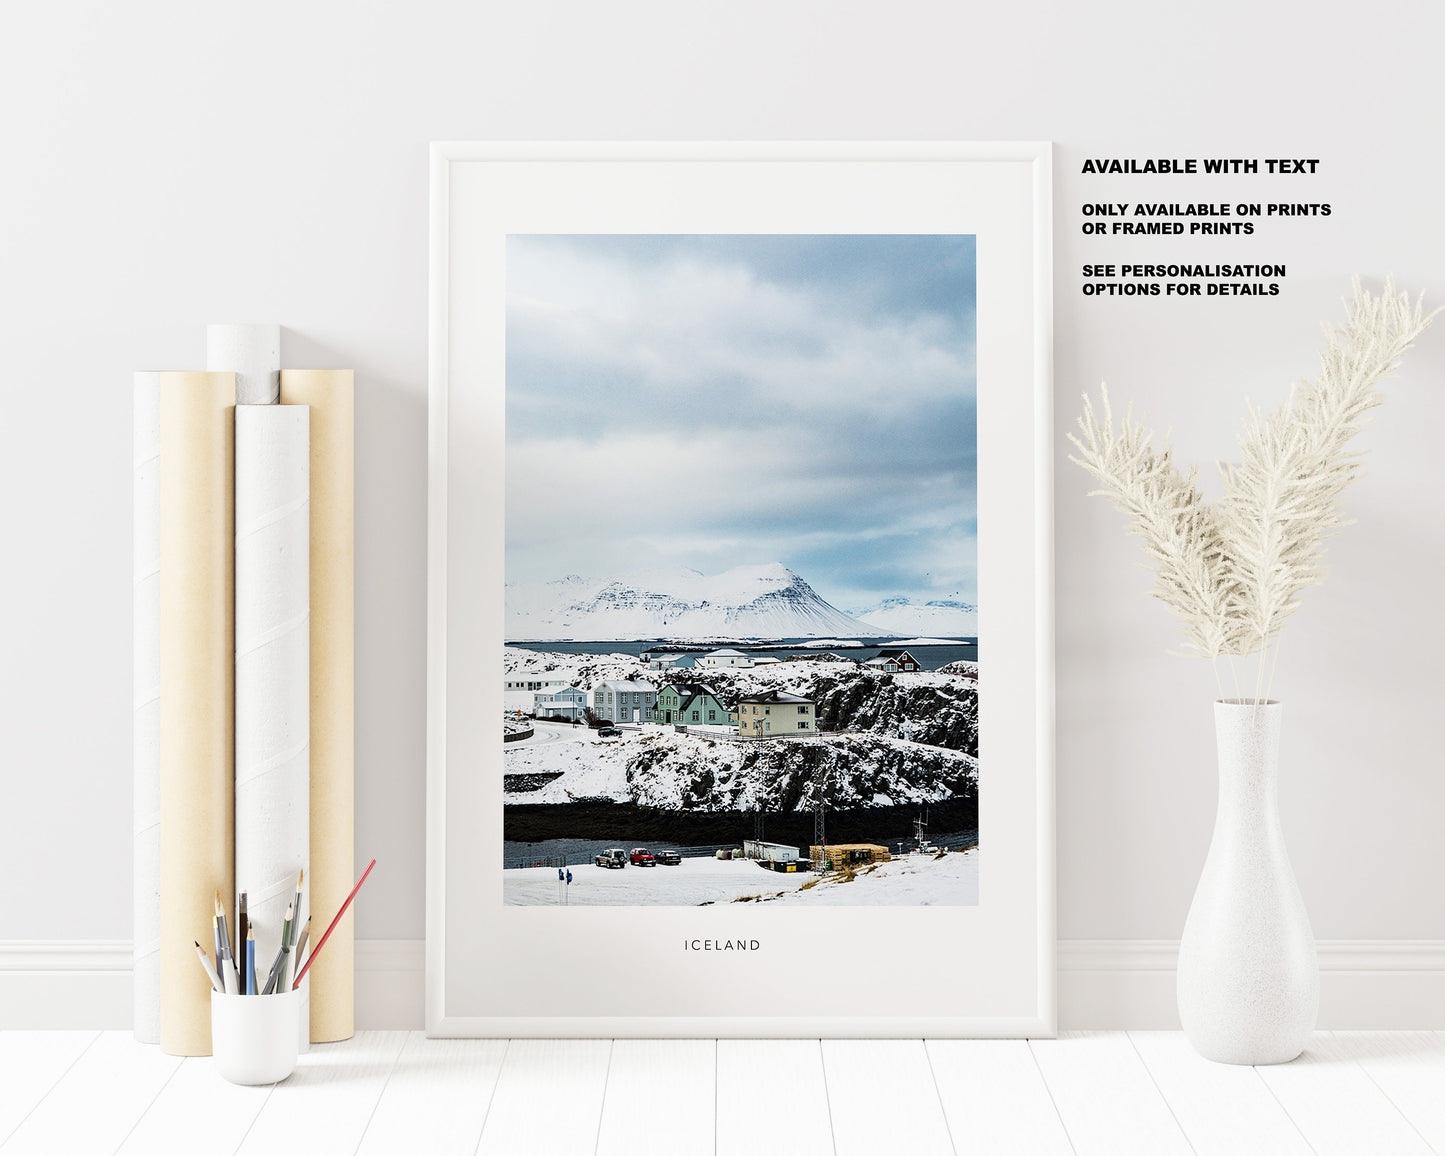 Stykkisholmur - Iceland Photography Print - Iceland Wall Art - Iceland Poster - Icelandic Houses - Contemporary - Snaefellsness - Northern